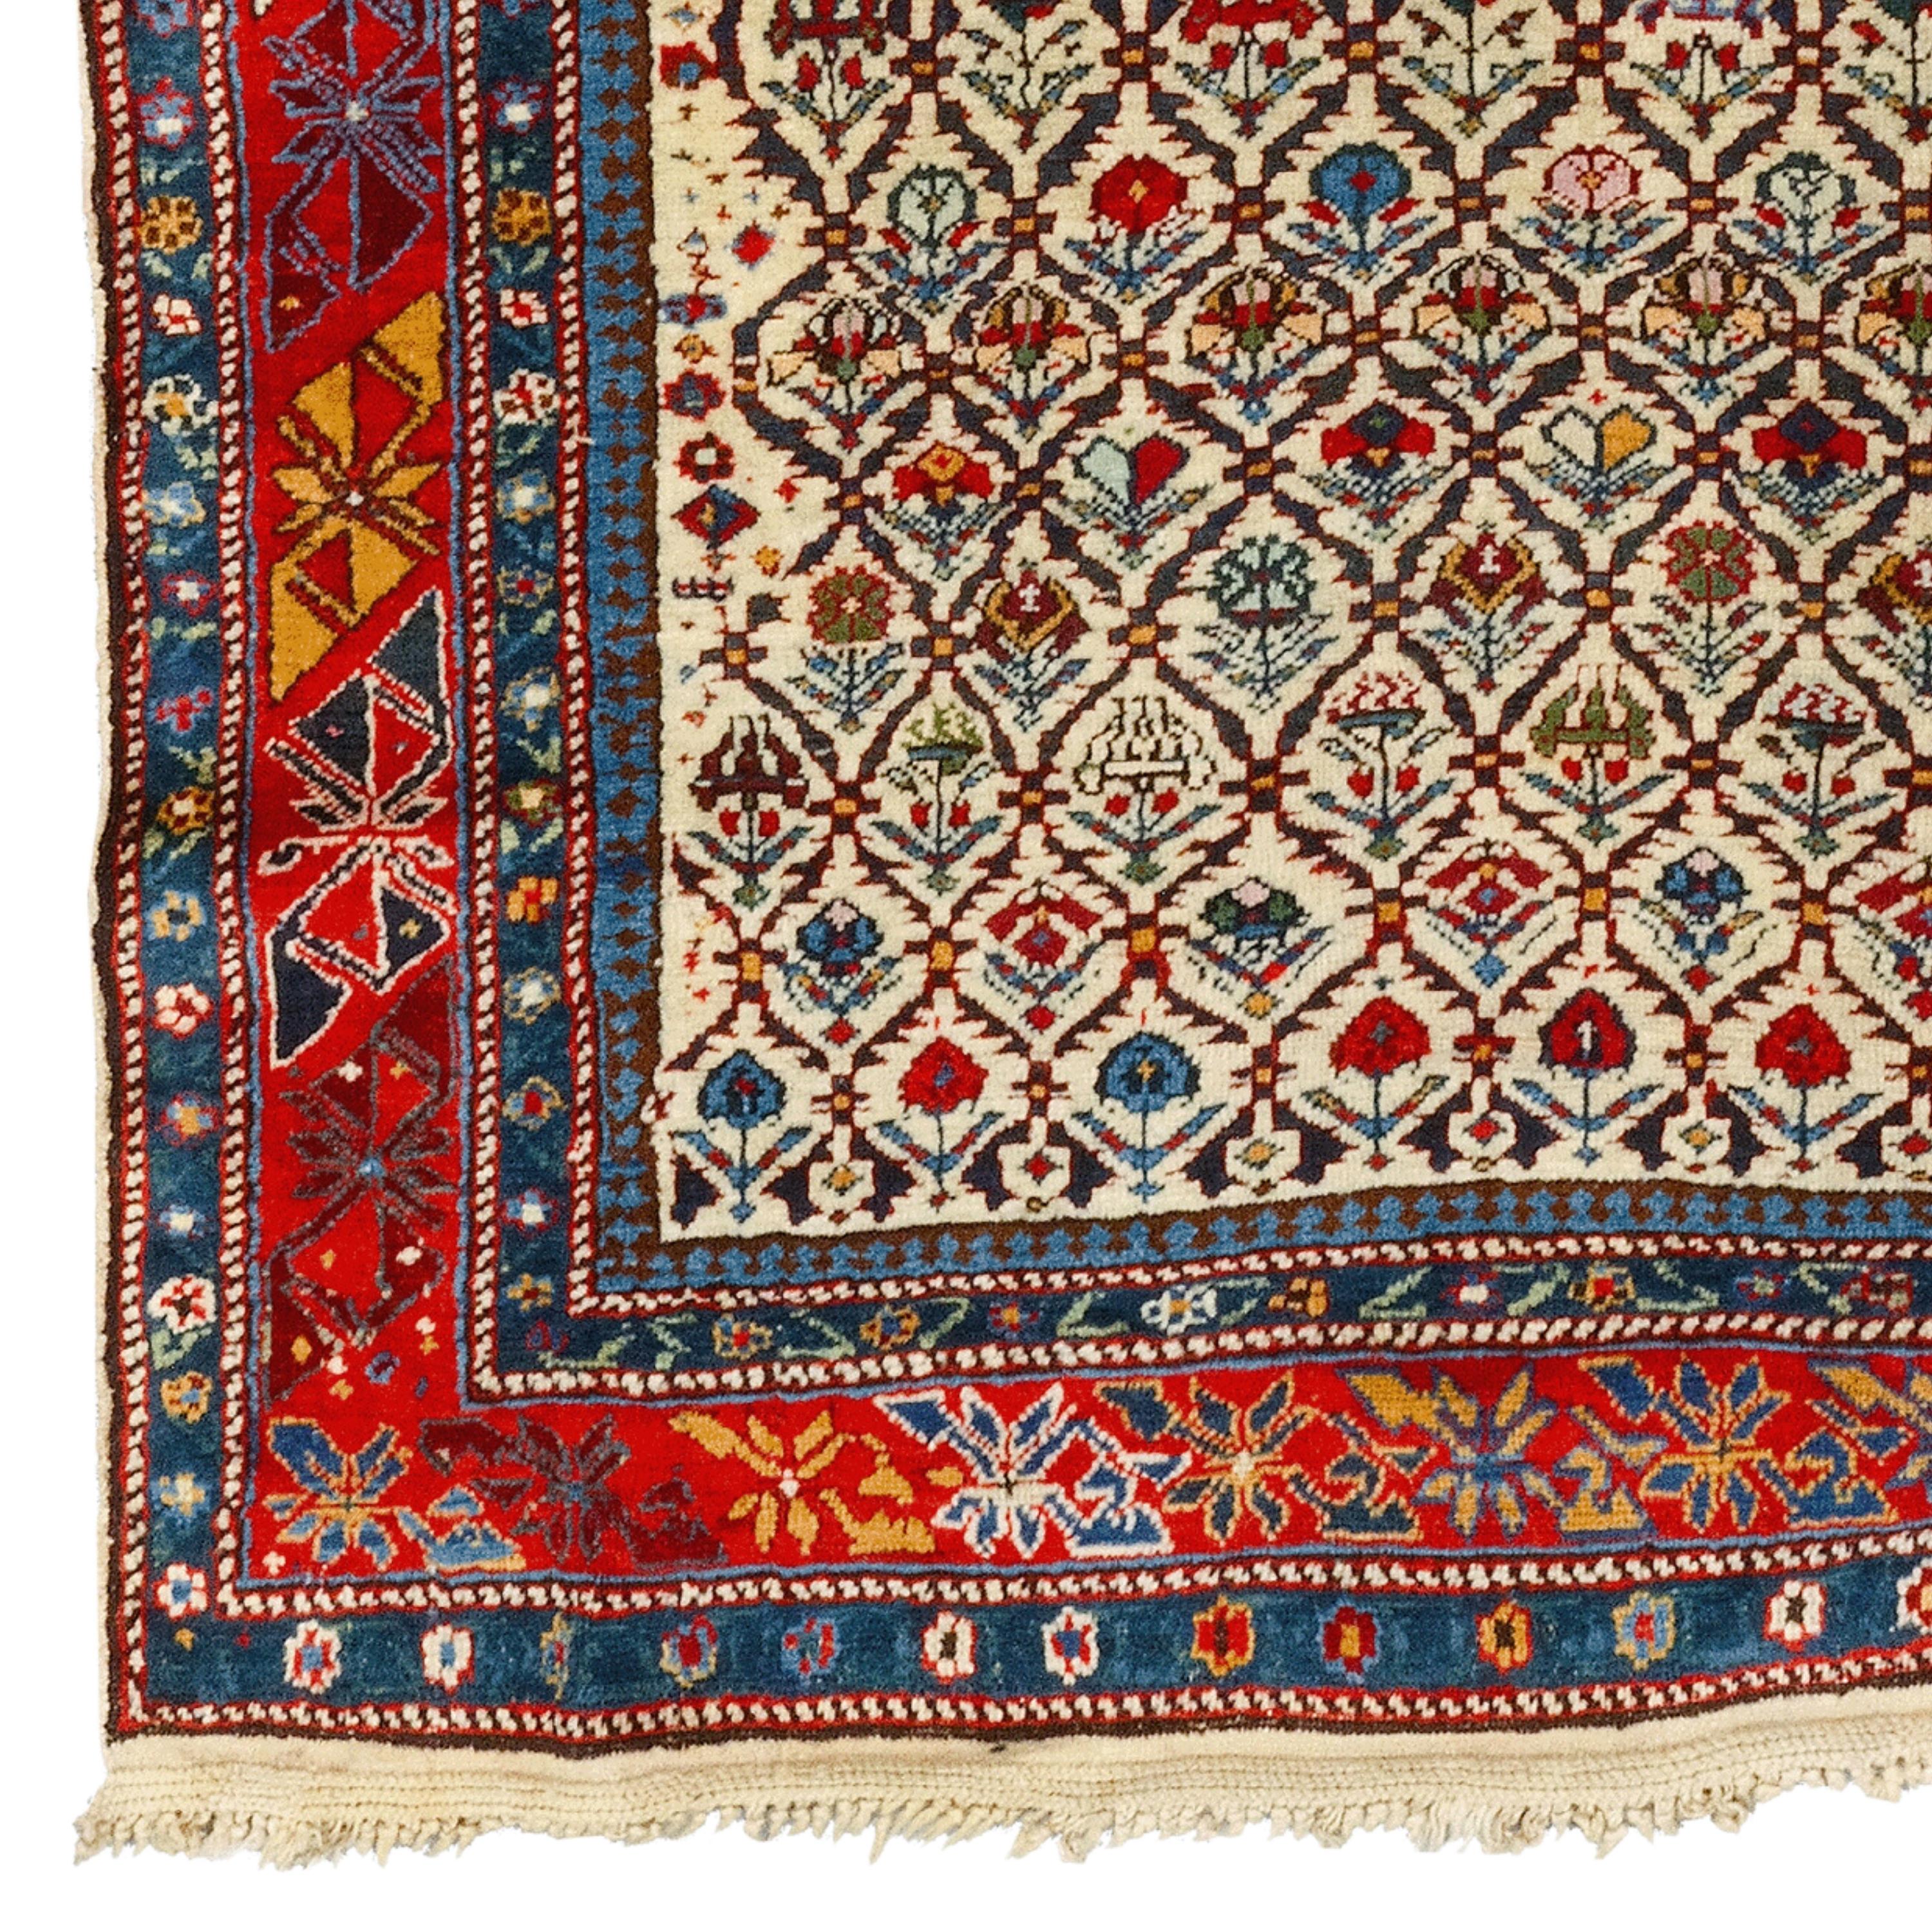 Unique 19th Century Caucasian Shirvan Rug

This elegant 19th-century Caucasian Shirvan carpet represents a historical and cultural heritage. This work, which draws attention with its rich color palette and complex patterns, tells a fascinating story